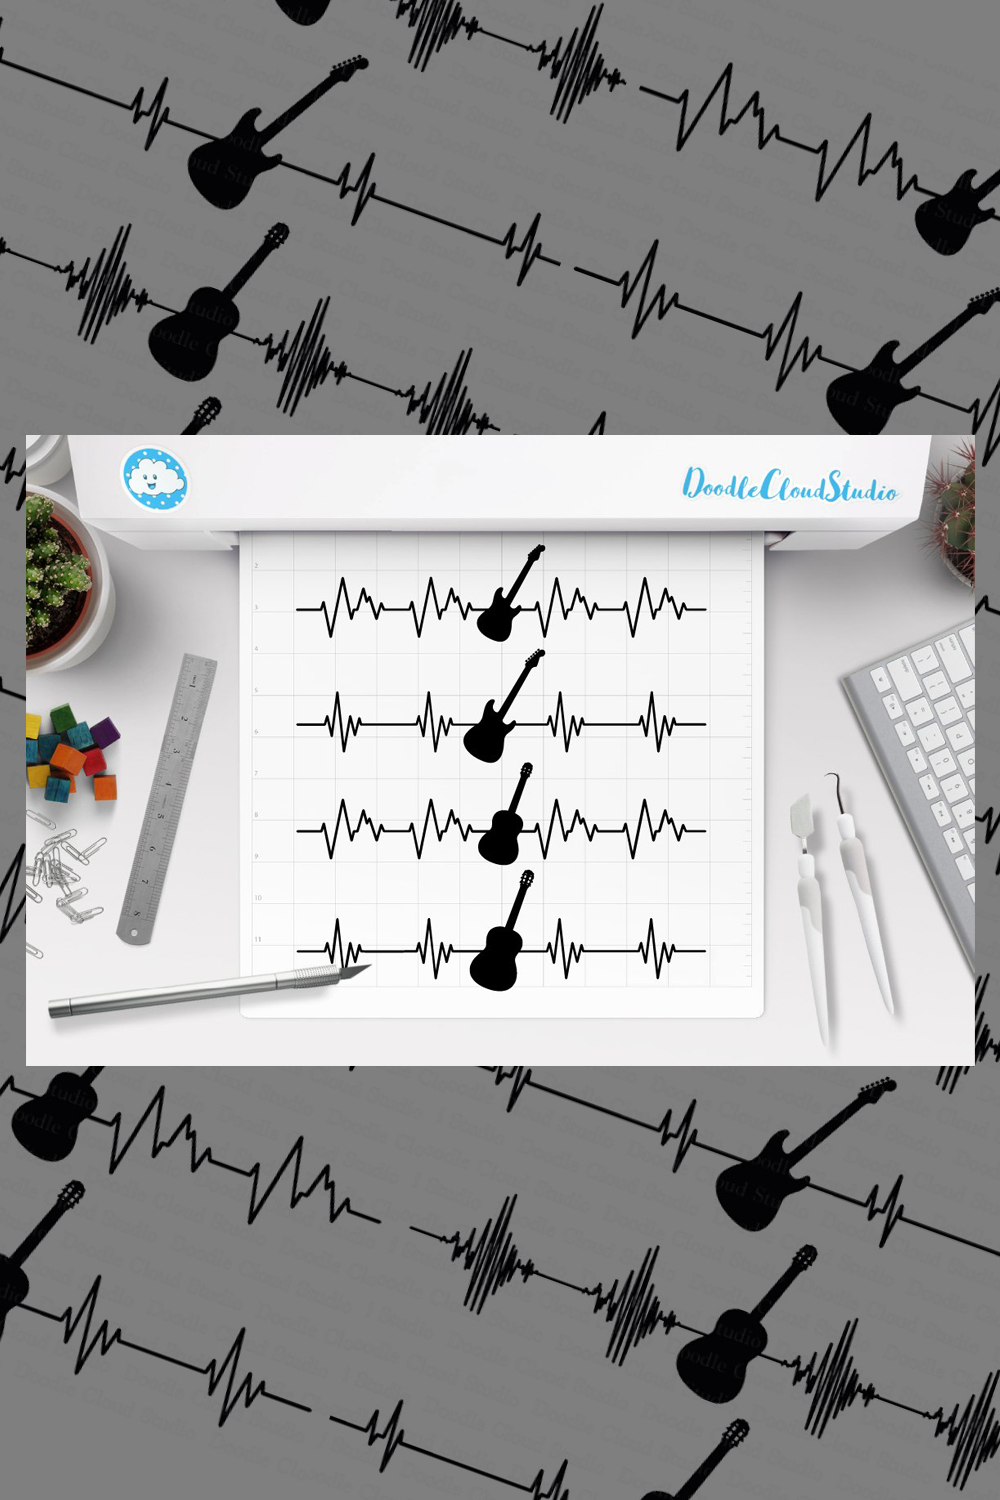 Image of heart rhythm with guitar.